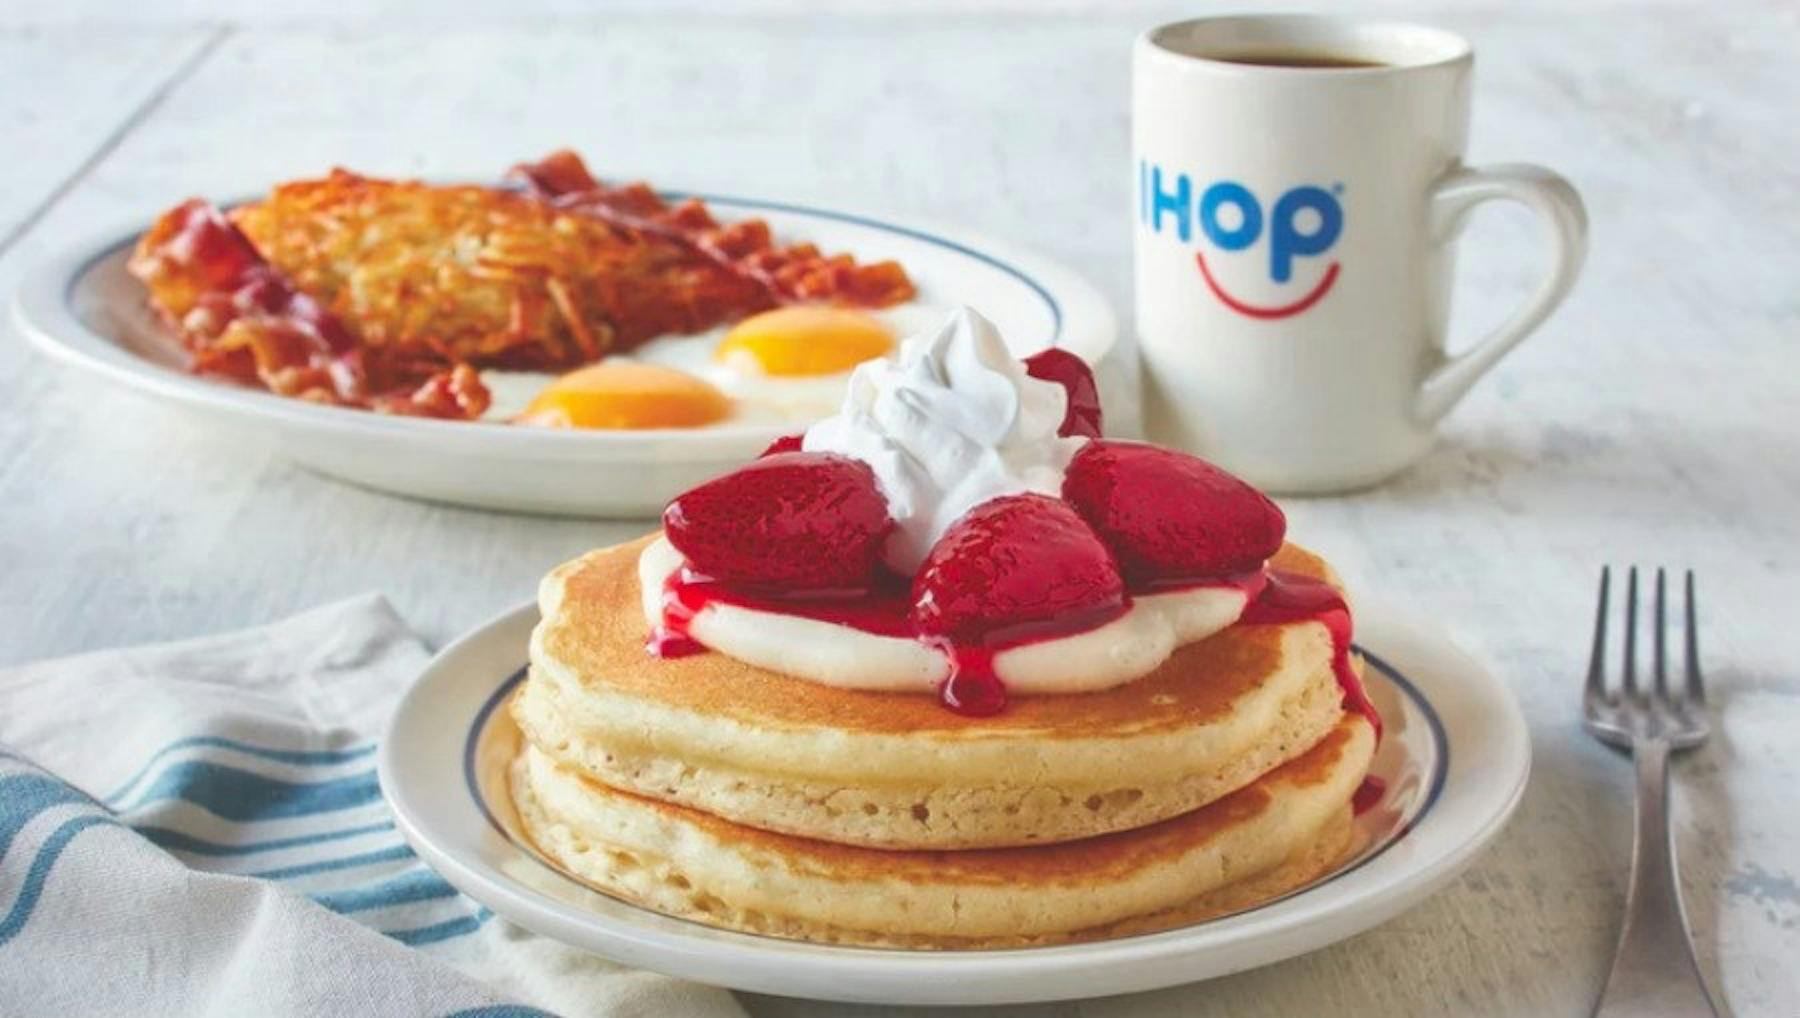 IHOP - South in Salina - Highlight